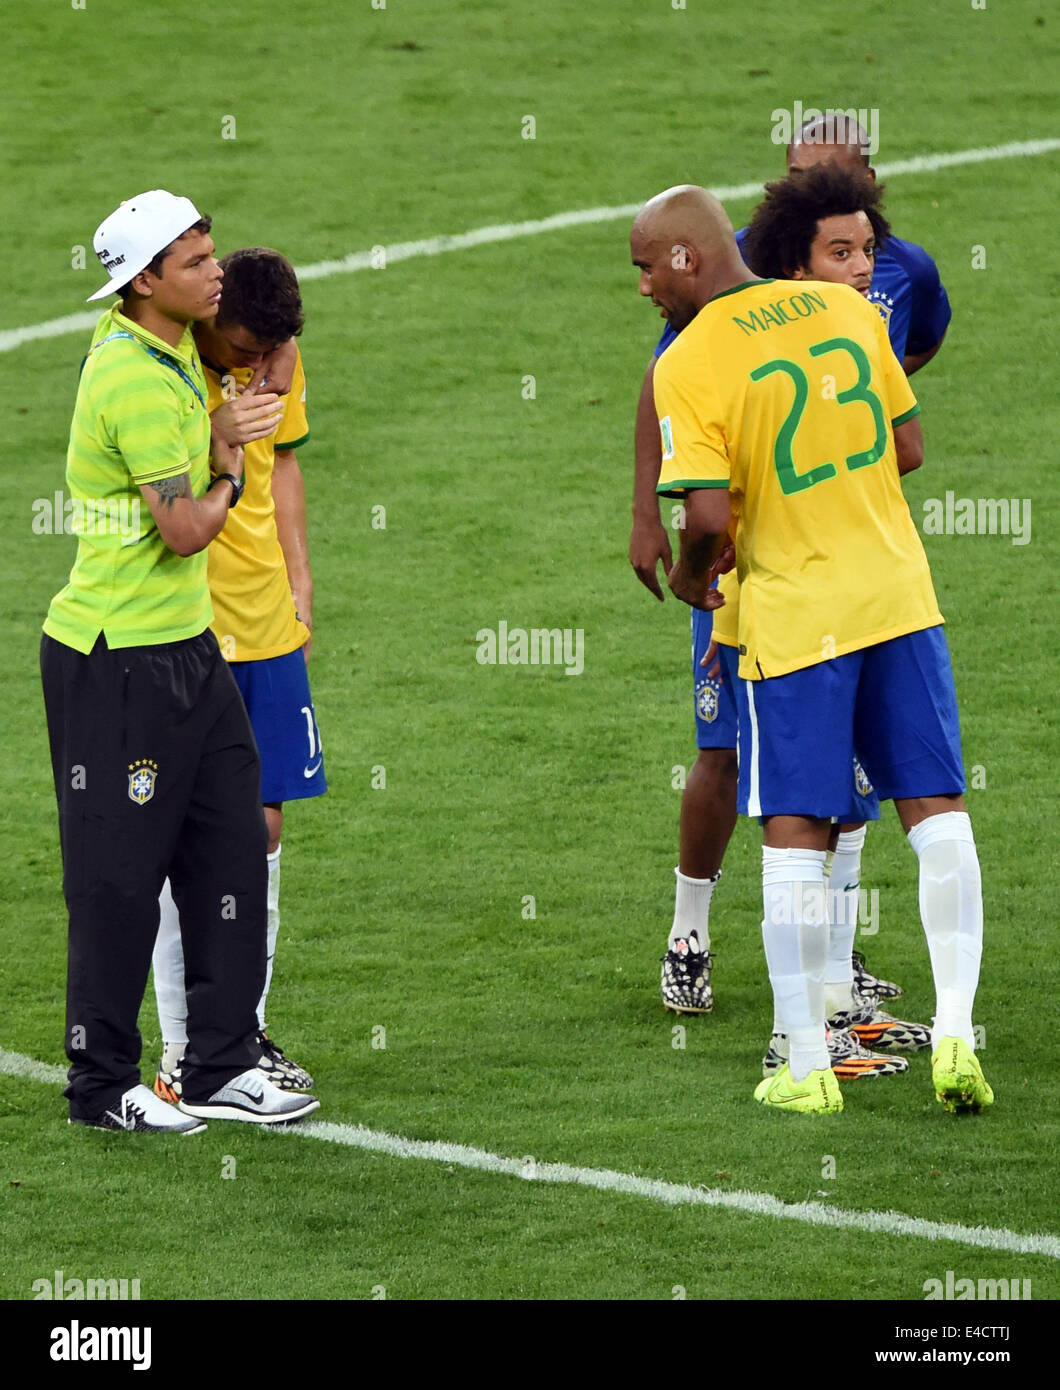 Belo Horizonte, Brazil. 08th July, 2014. Brazil's Thiago Silva (L) hugs Oscar next to Maicon (R) after the FIFA World Cup 2014 semi-final soccer match between Brazil and Germany at Estadio Mineirao in Belo Horizonte, Brazil, 08 July 2014. Photo: Andreas Gebert/dpa/Alamy Live News Stock Photo